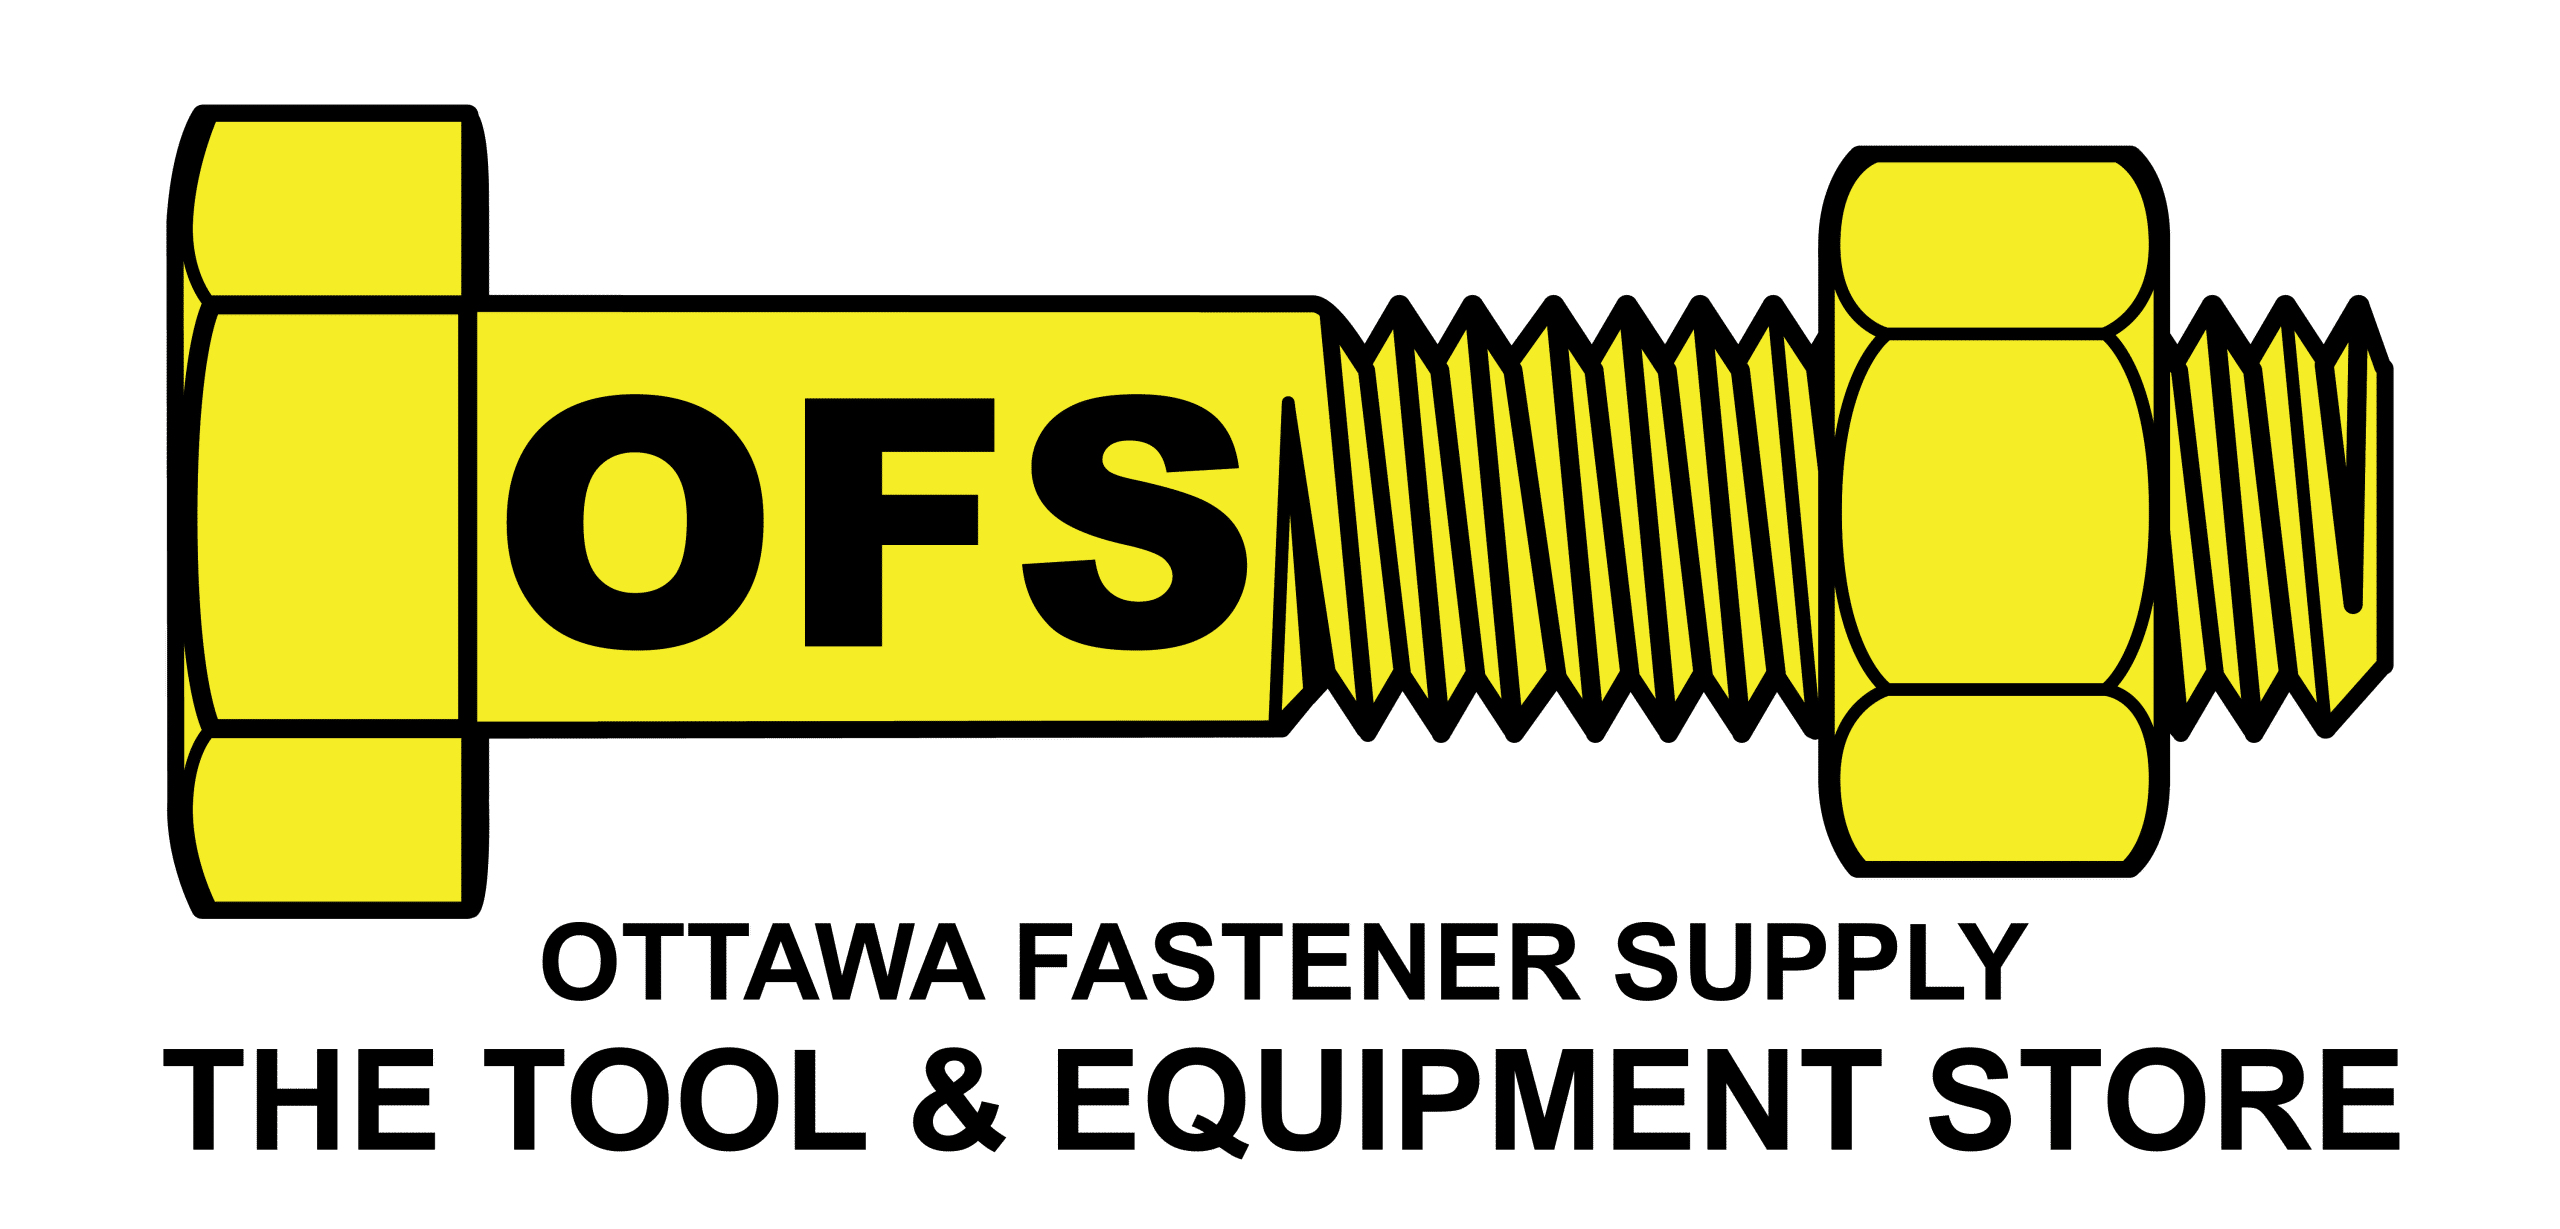 OFS LOGO 01 TRANS WITH BLK TEXT